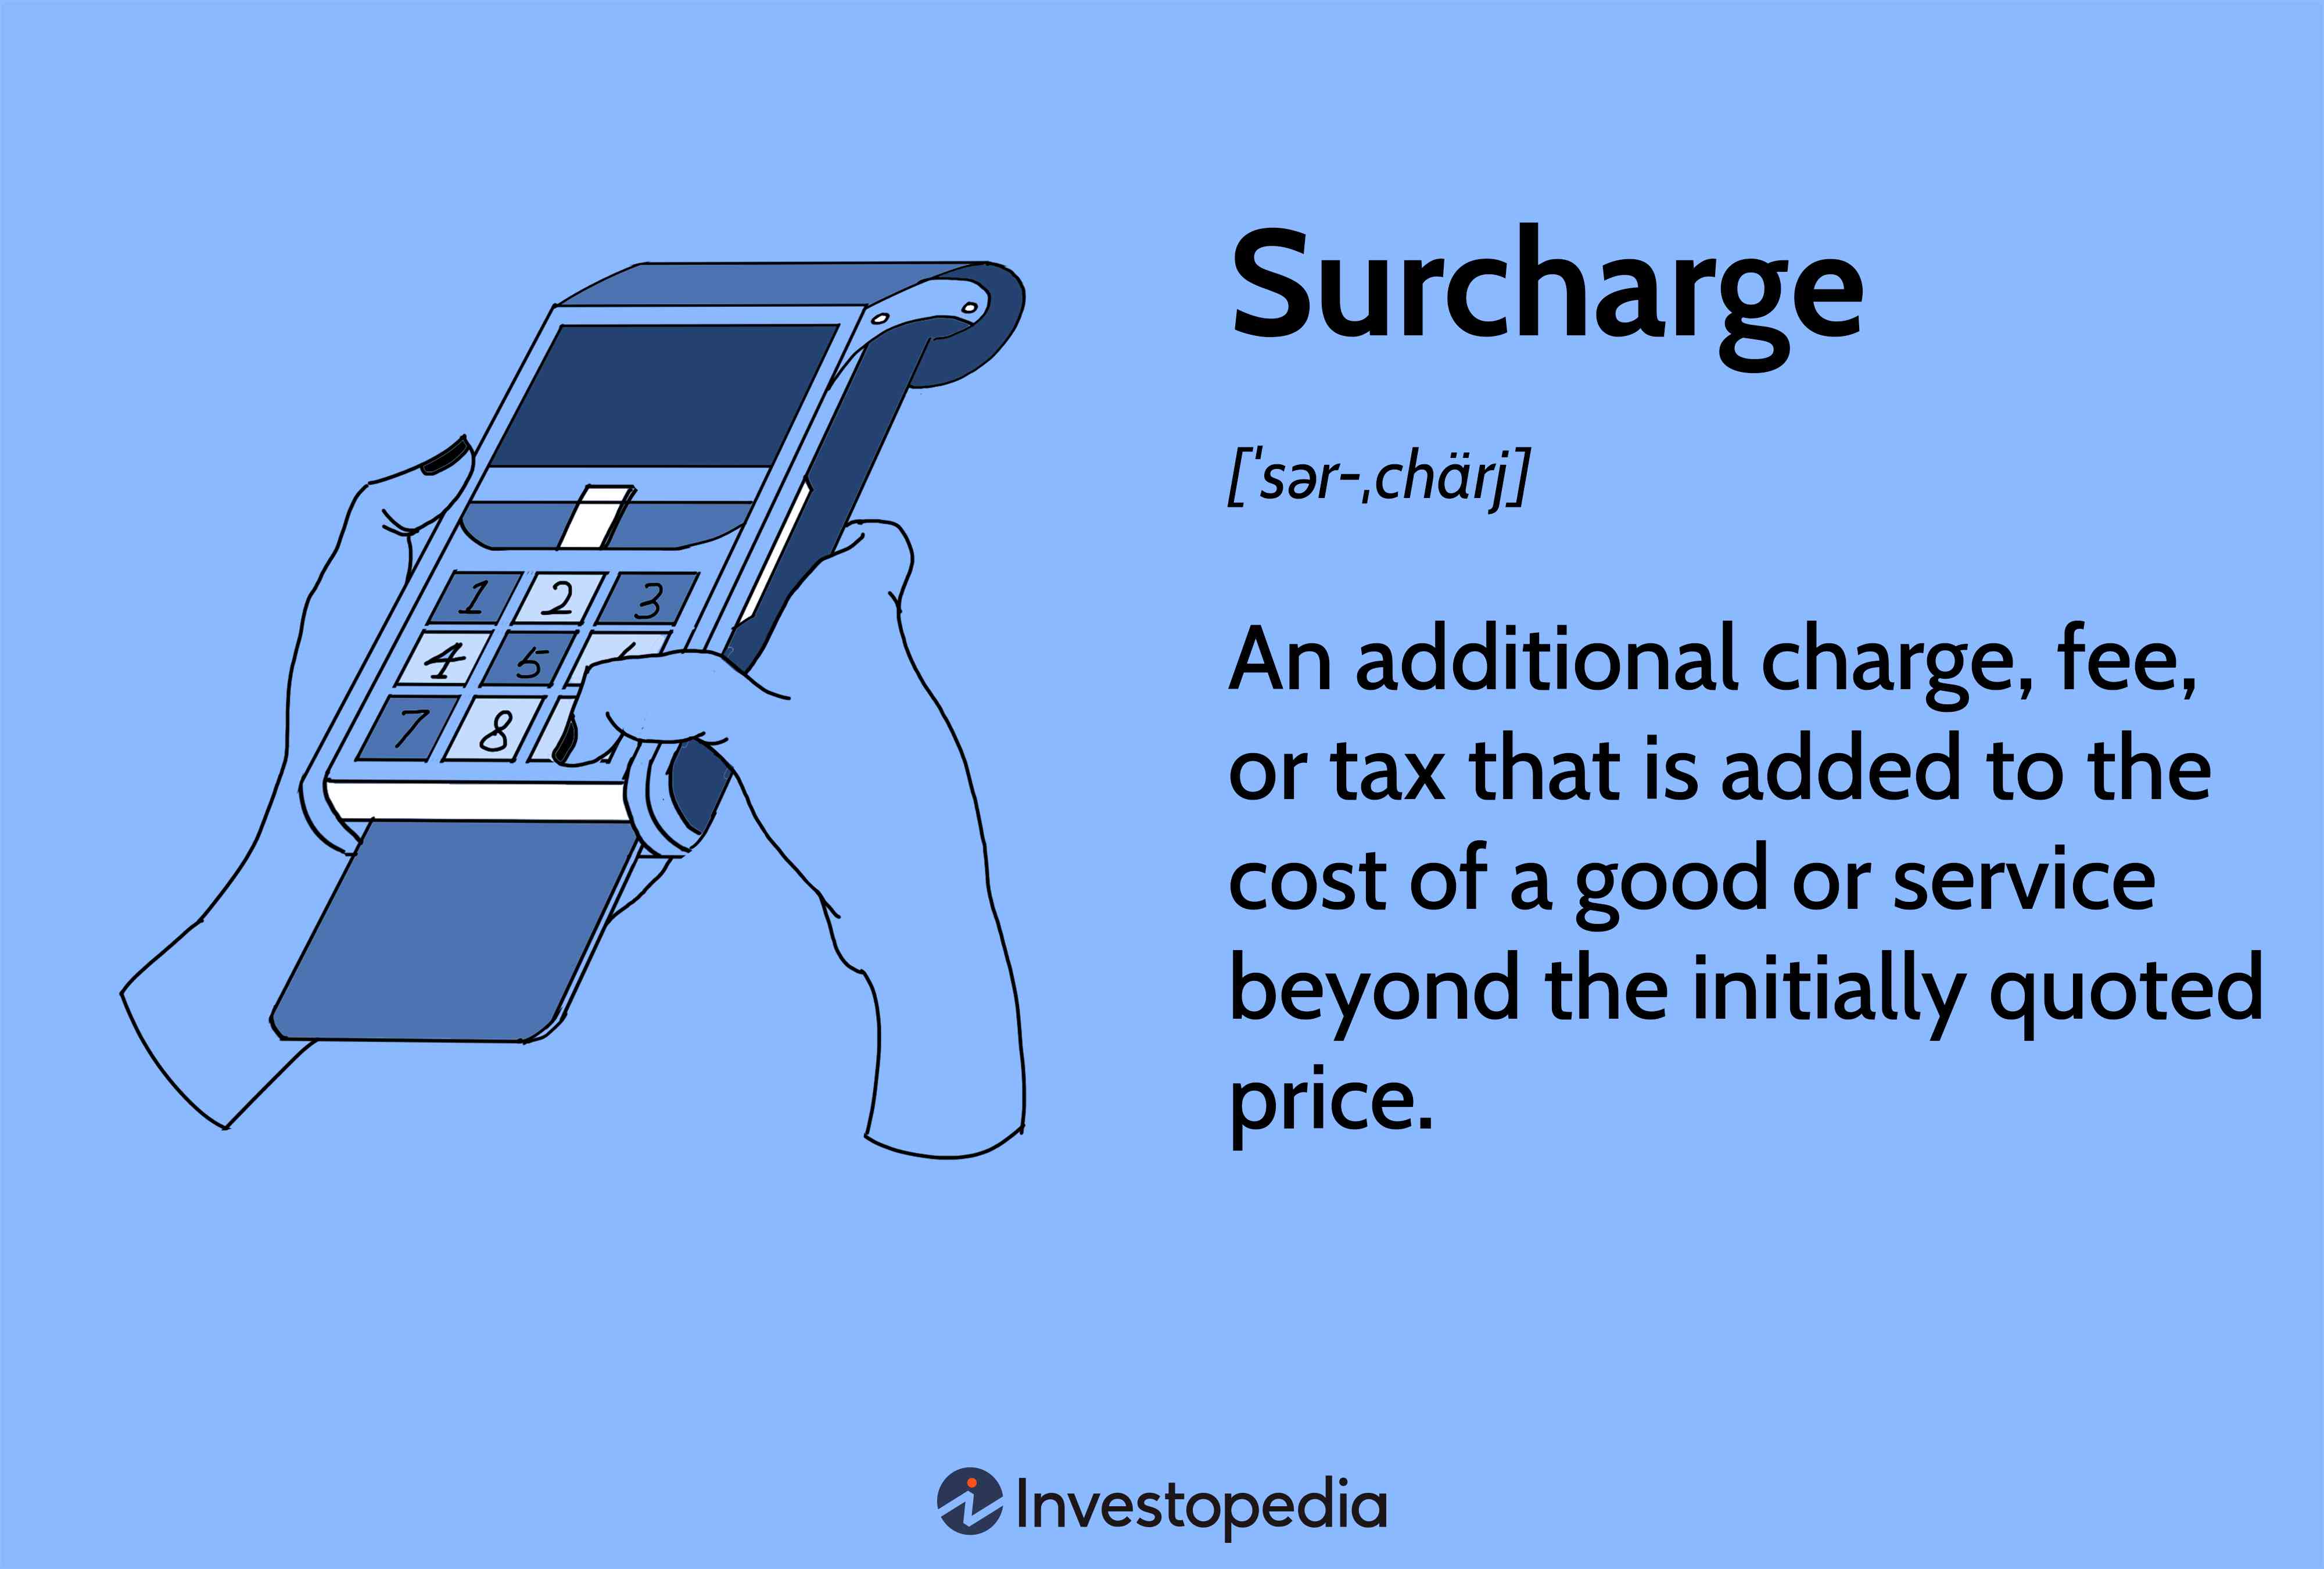 Surcharge: An additional charge, fee, or tax that is added to the cost of a good or service beyond the initially quoted price.